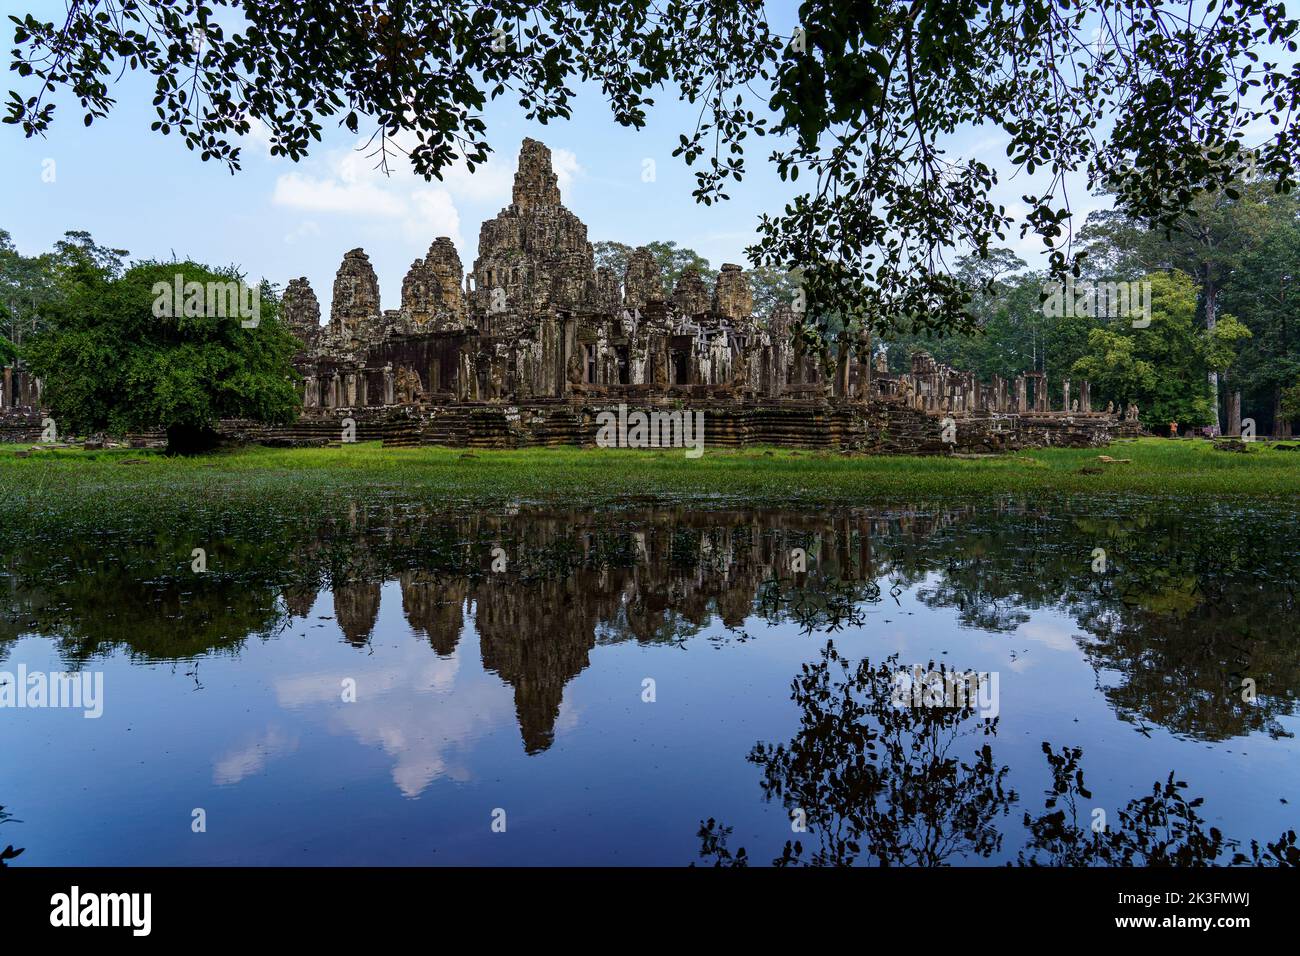 Cambodia. Siem Reap. The archaeological park of Angkor. The Bayon temple 12th century Hindu temple and its reflection on the lake Stock Photo